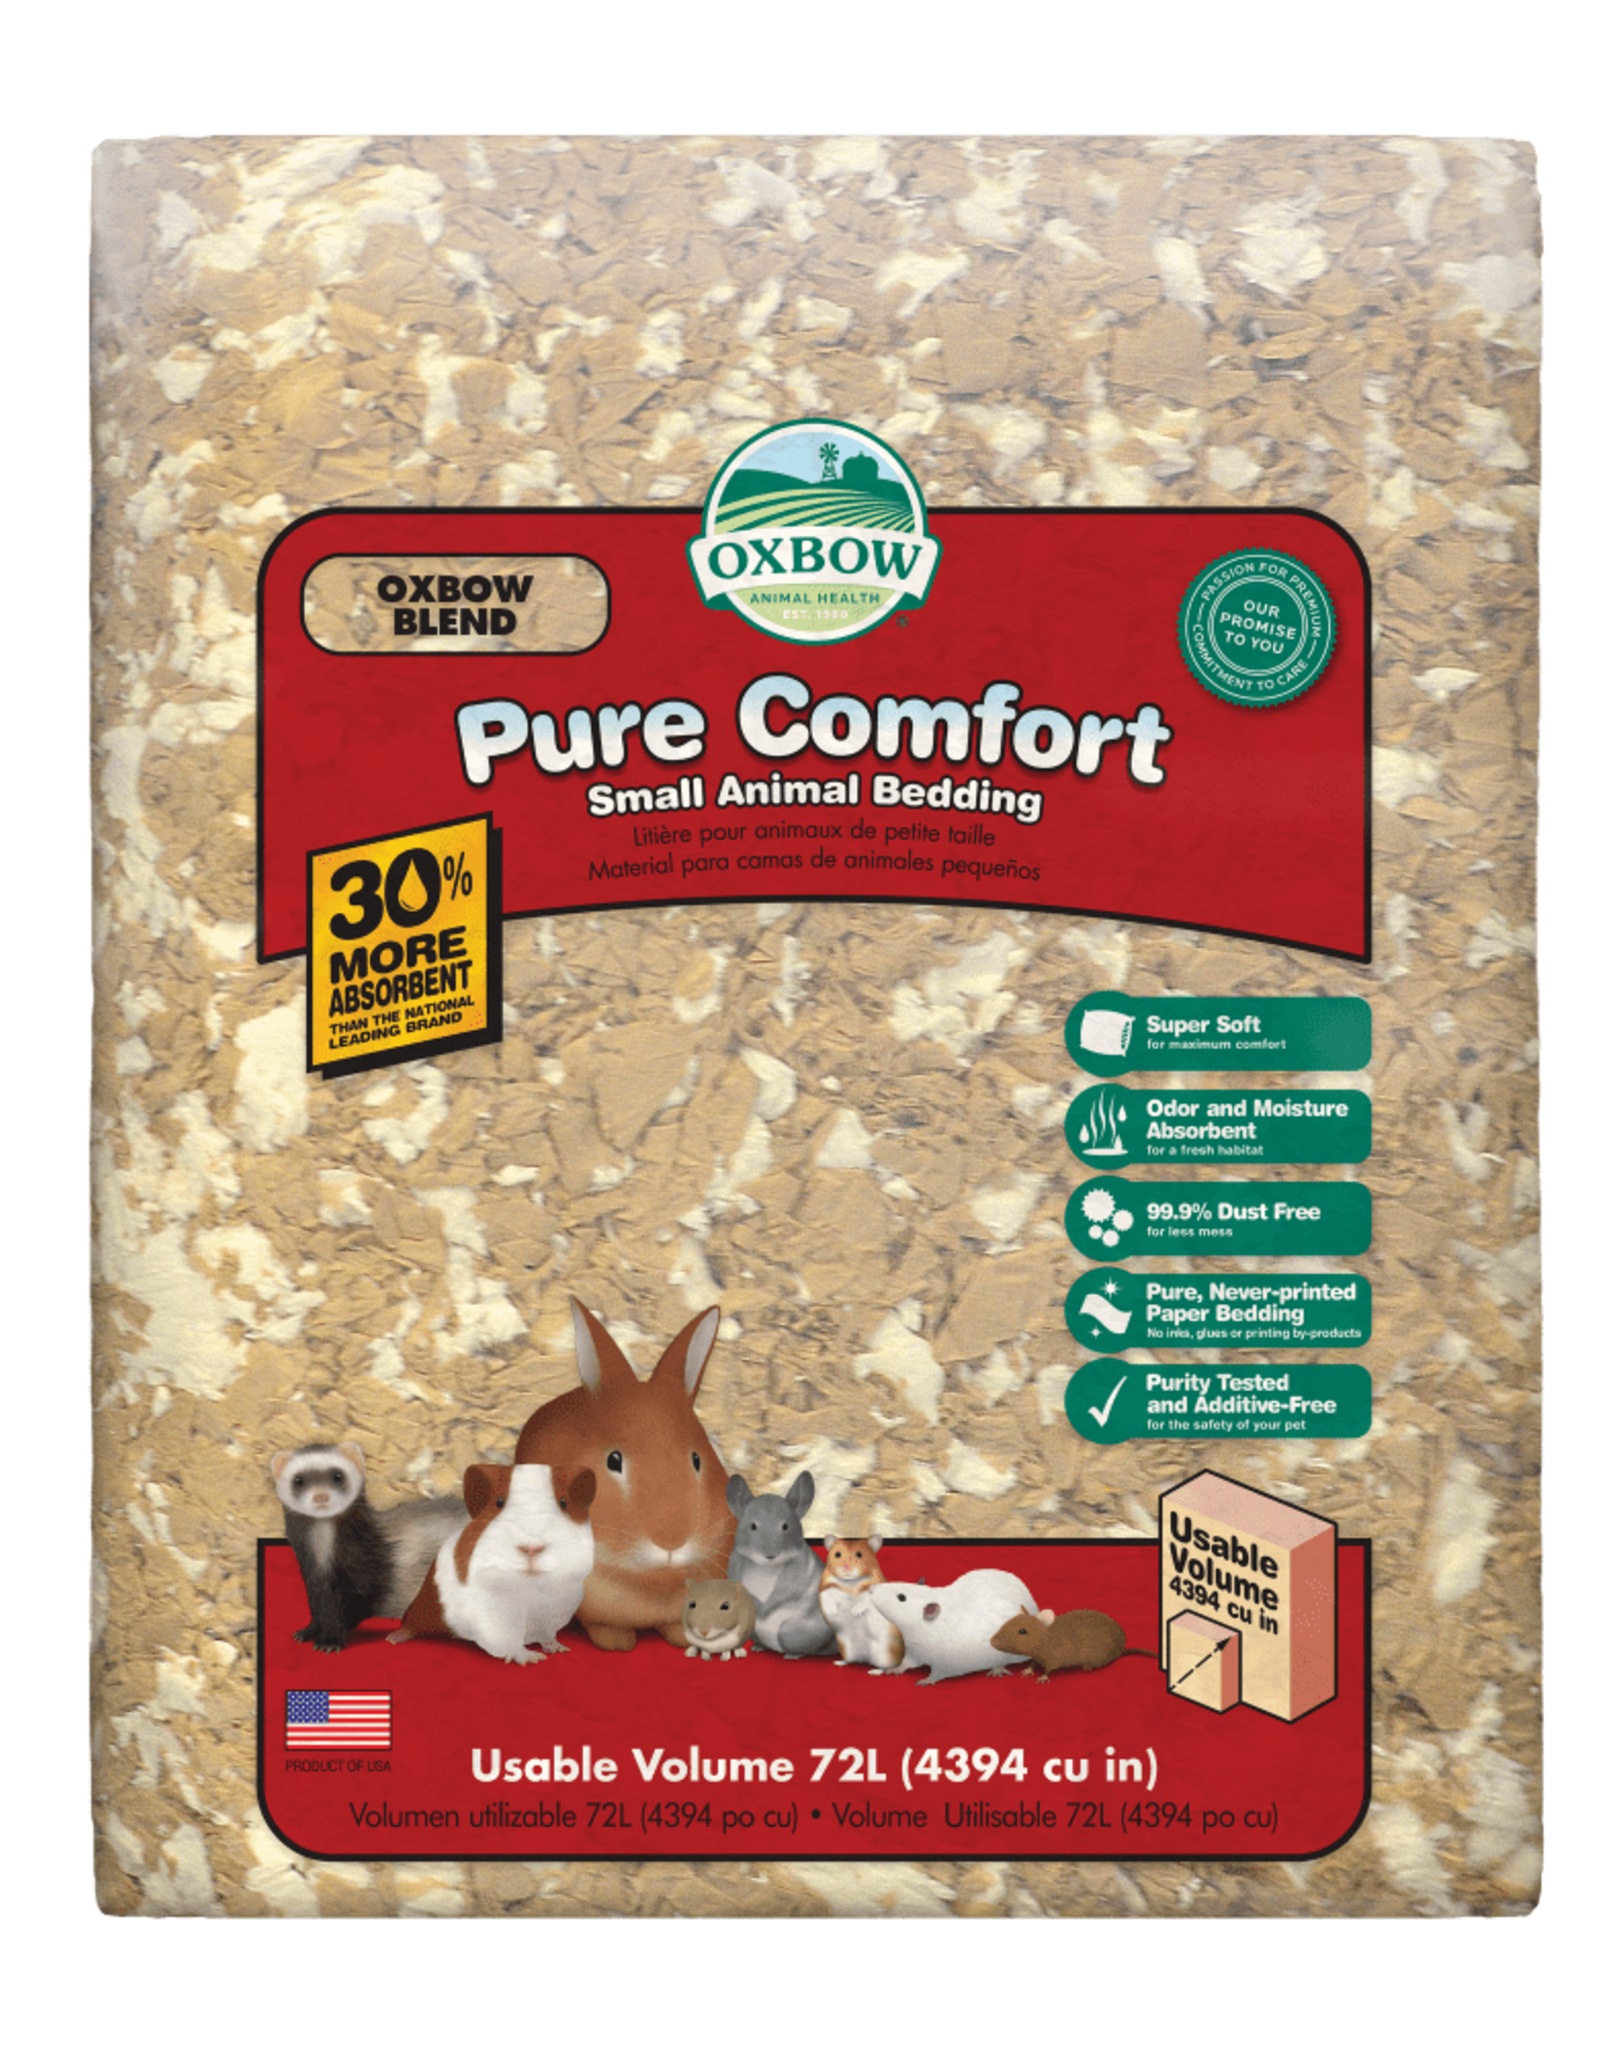 OXBOW PET PRODUCTS OXBOW PURE COMFORT BEDDING BLENDED 72L